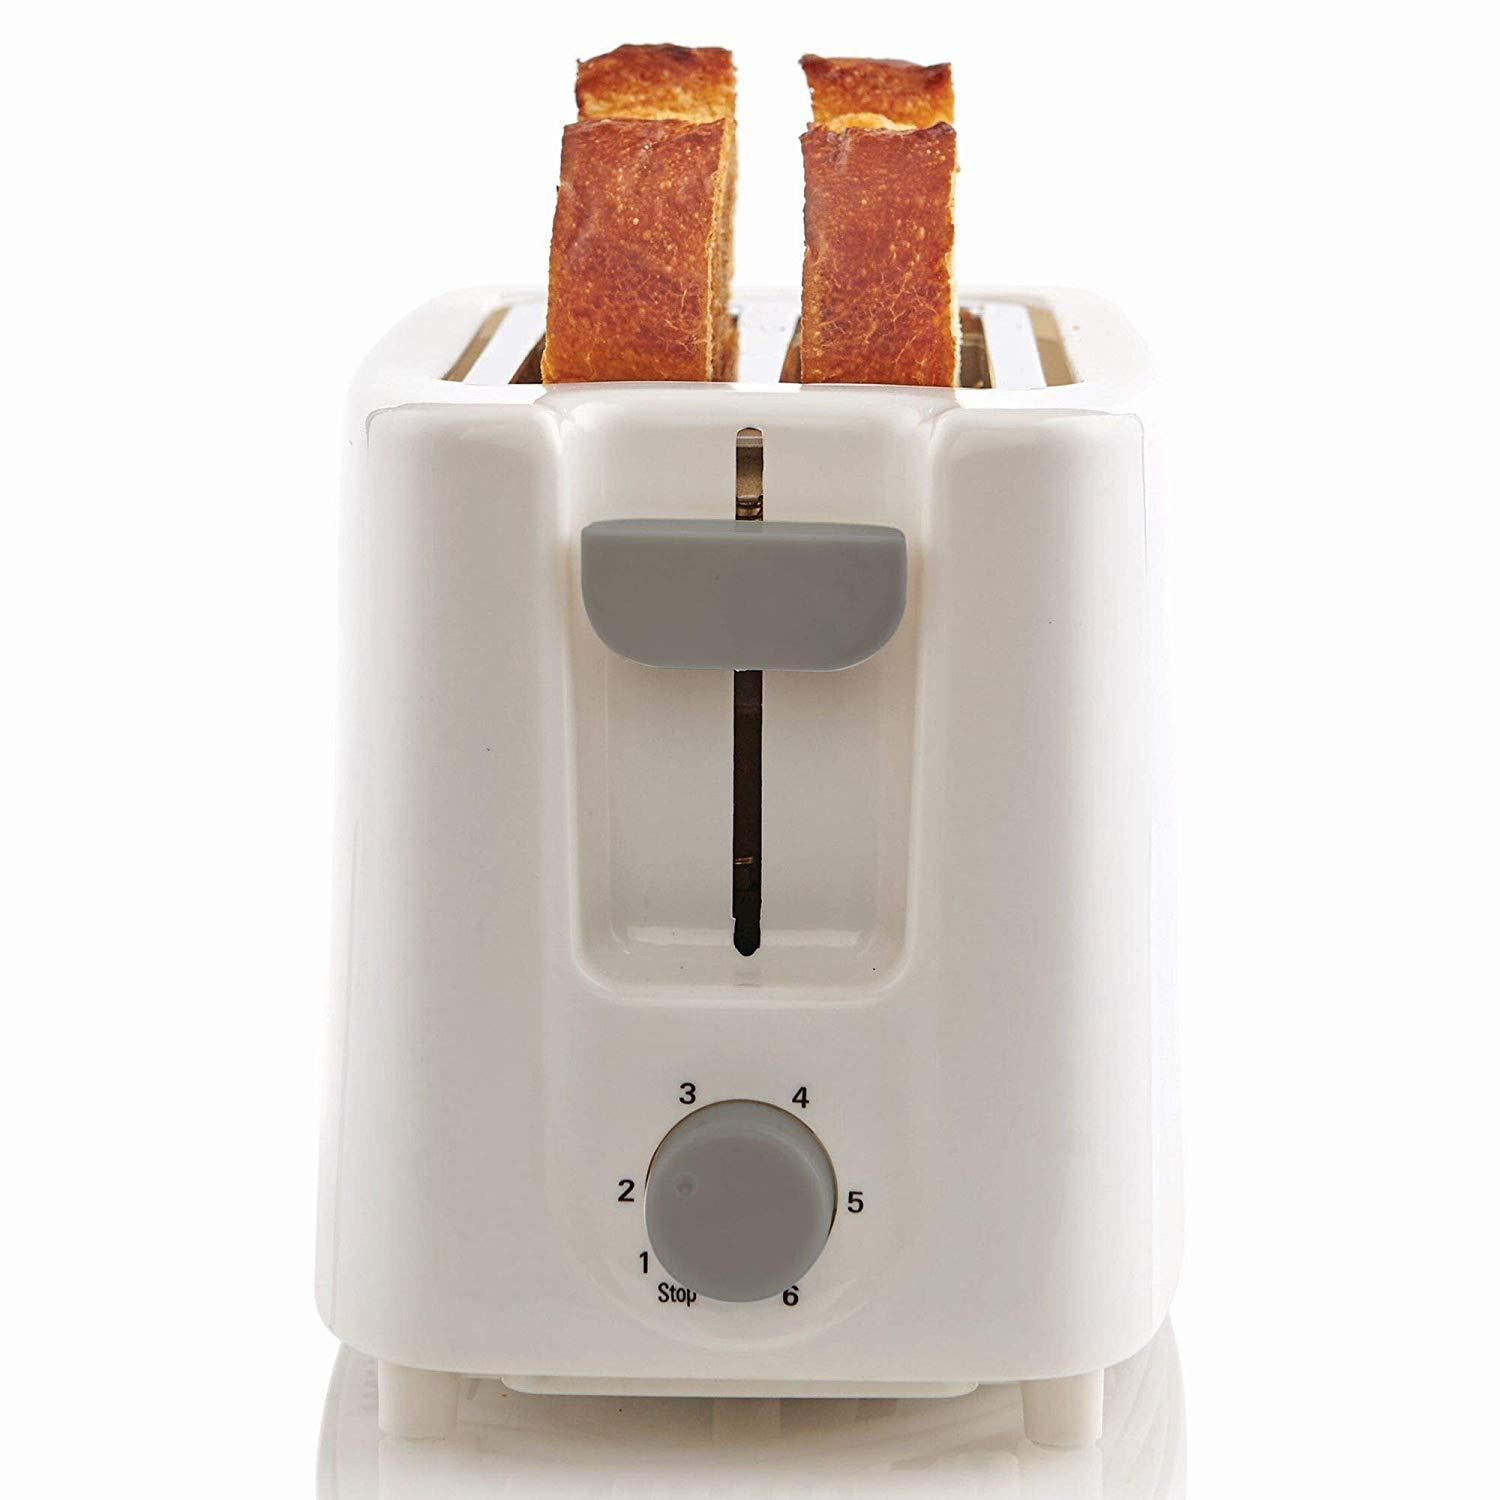 BRAND NEW Brentwood Appliances TS-260W 2-Slice Cool Touch Toaster White 